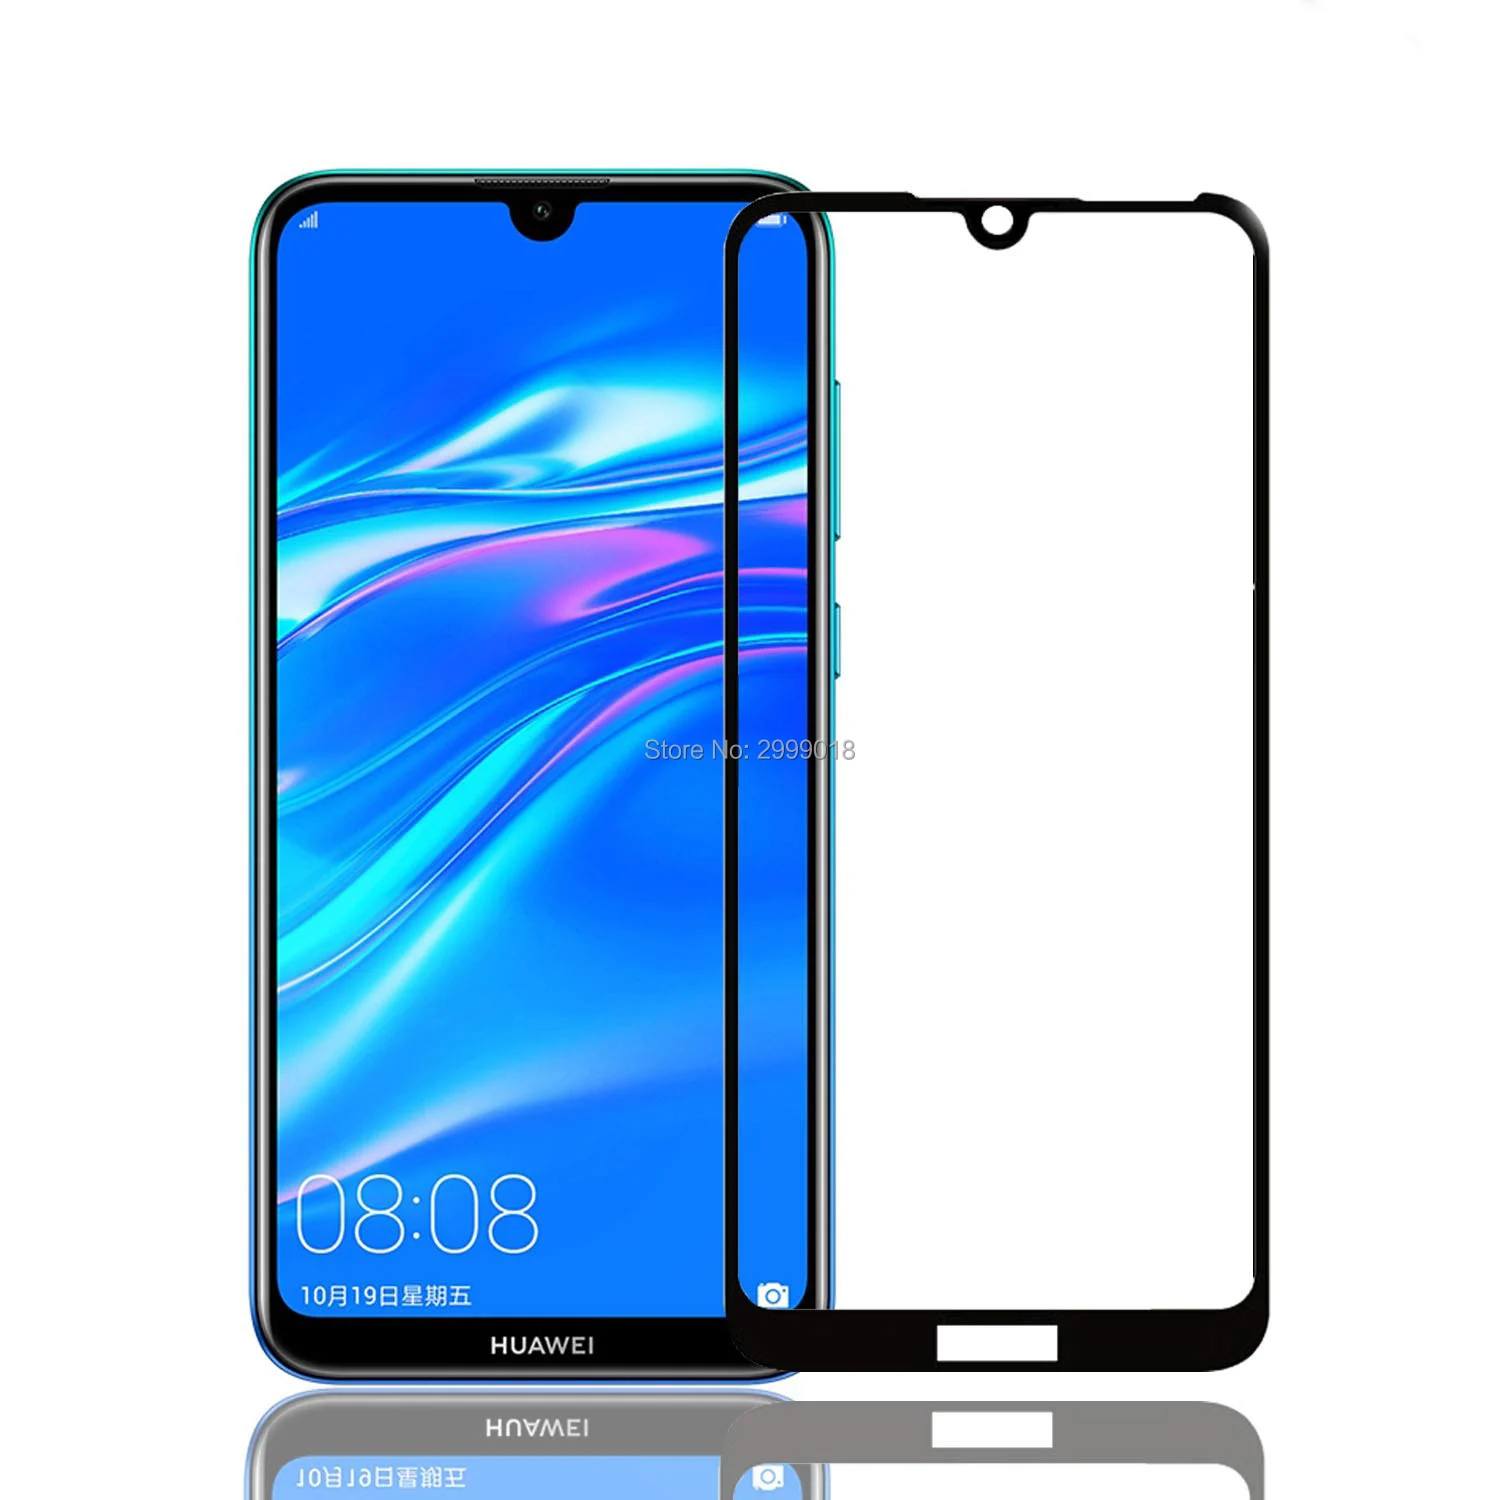 2 PACK Y6 2019 Screen Protector Glass,Tempered Glass Screen Protect for Huawei Y6 2019 Anti-Scratch Case Friendly ALWXCP Anti-Oil Crystal Clear -Transparent 9H Hardness 